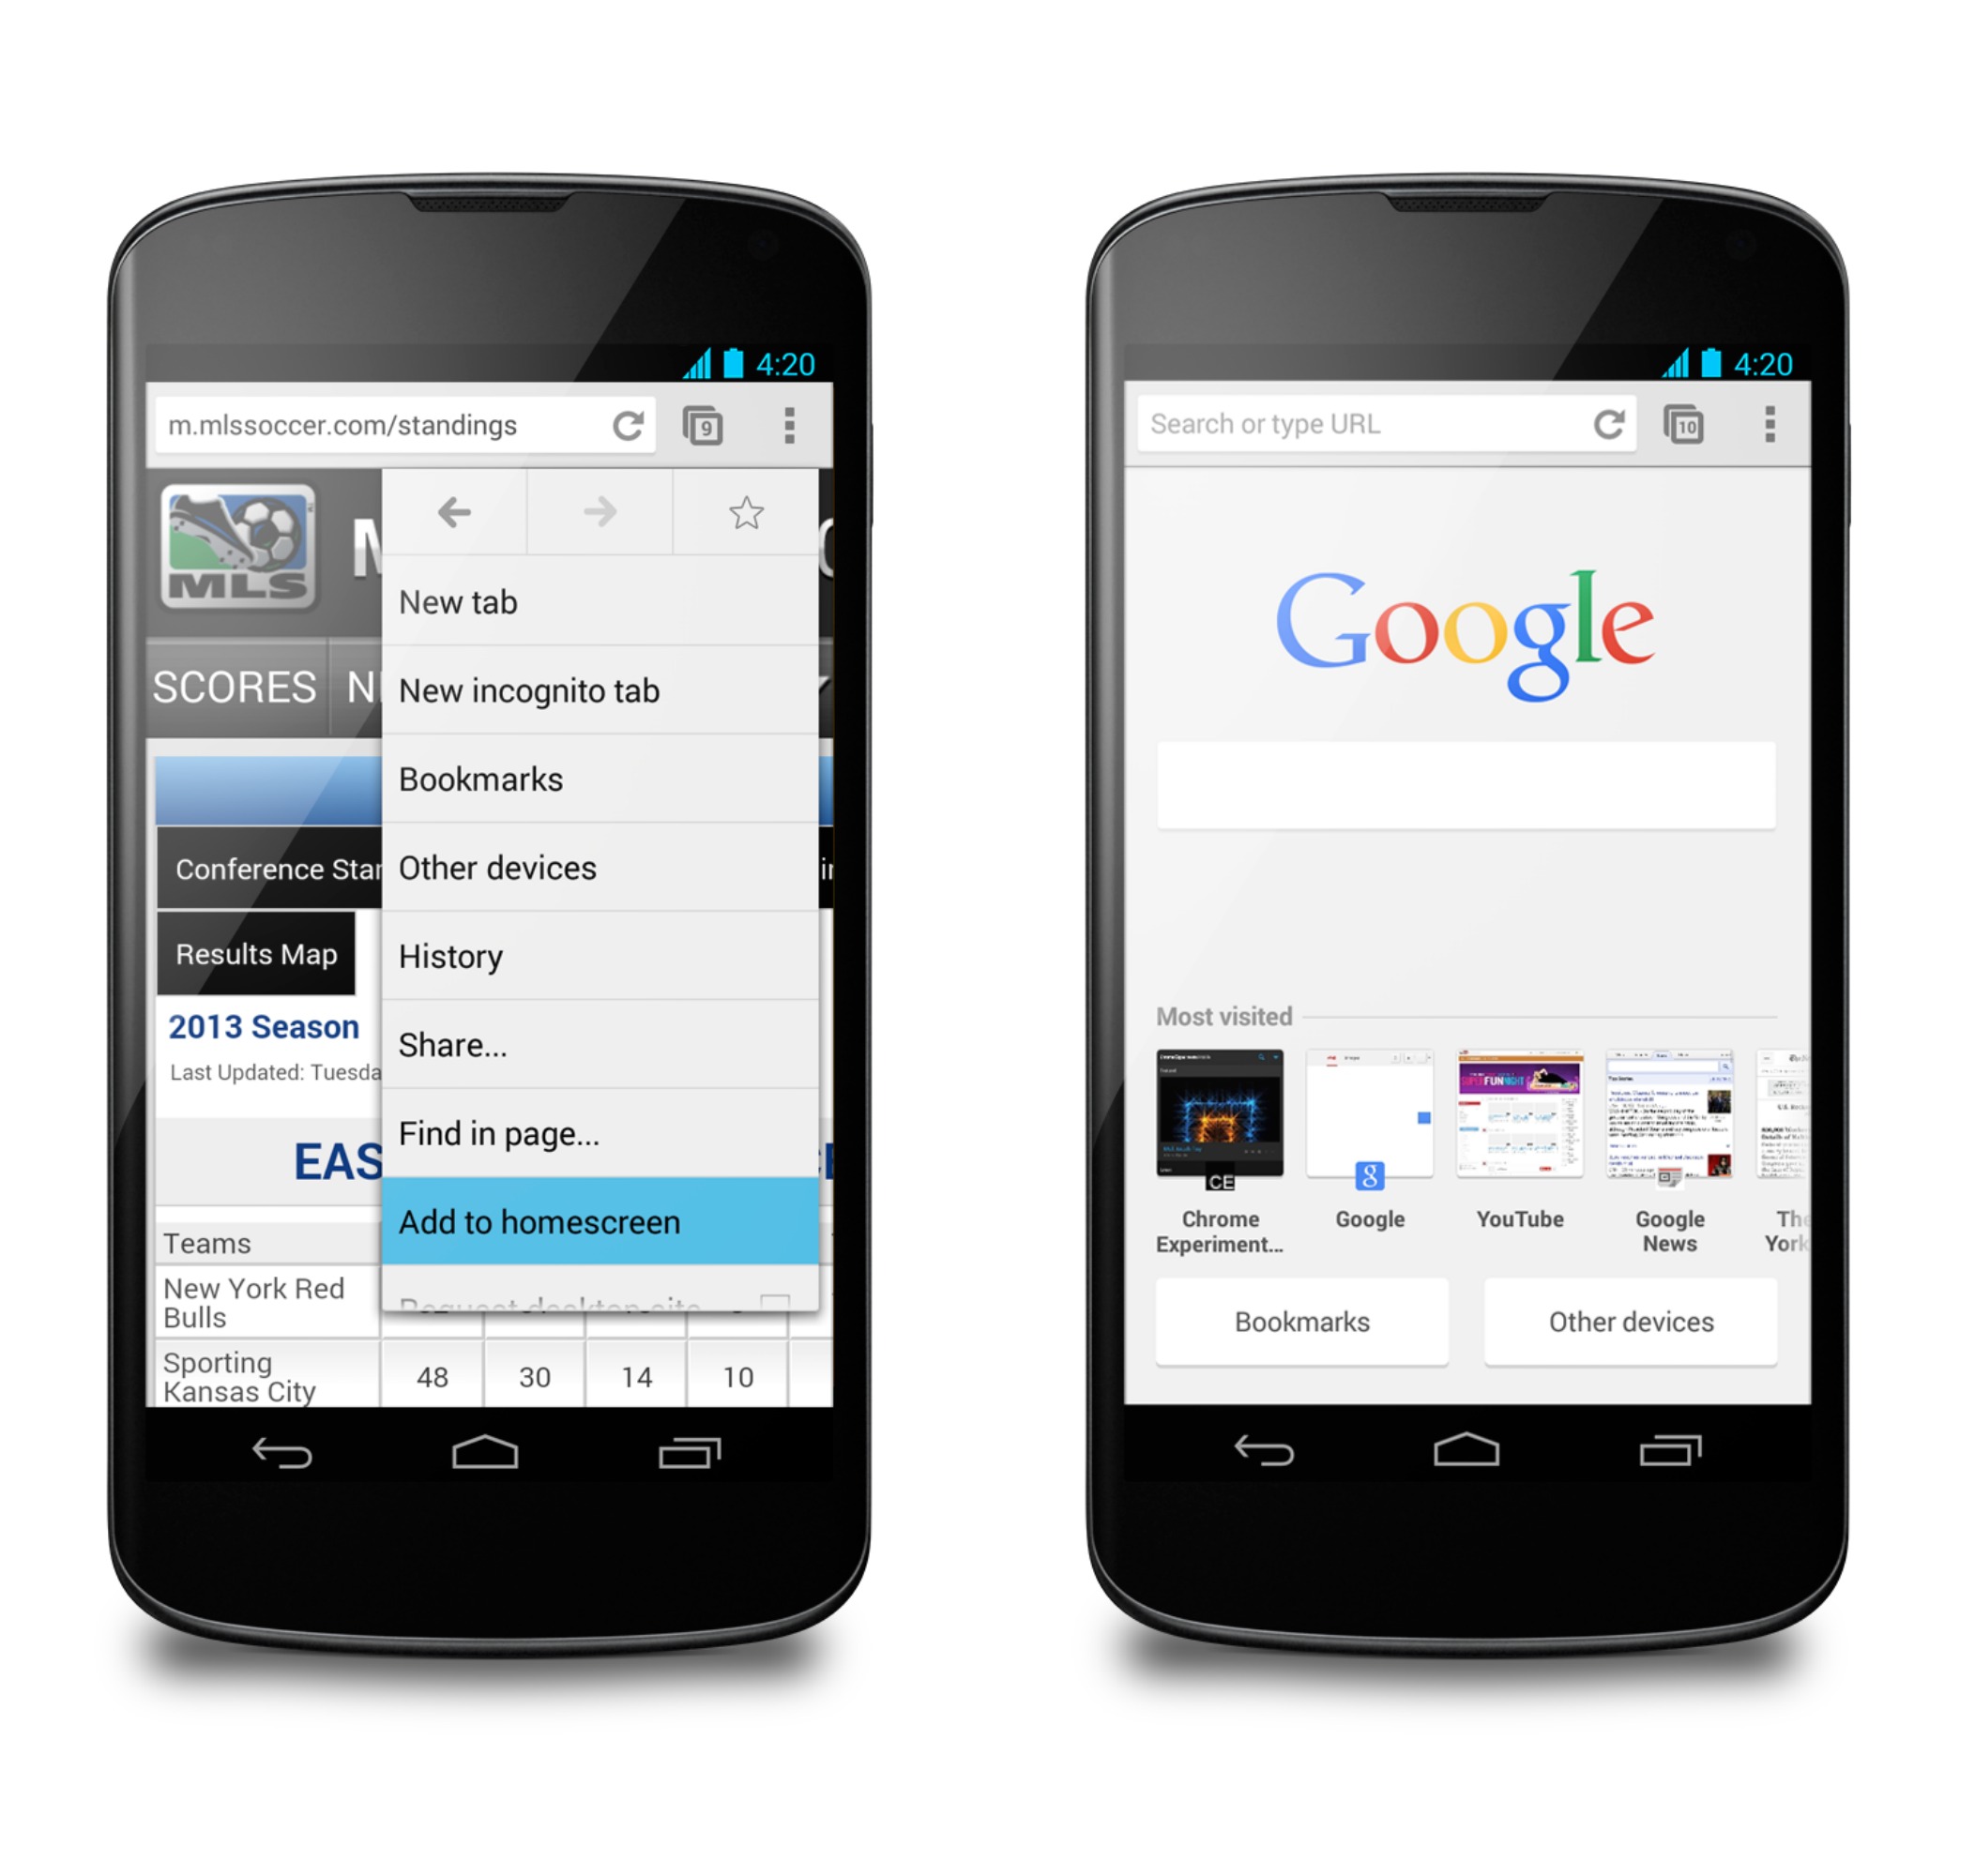 Google chrome free download for android 4.2.2